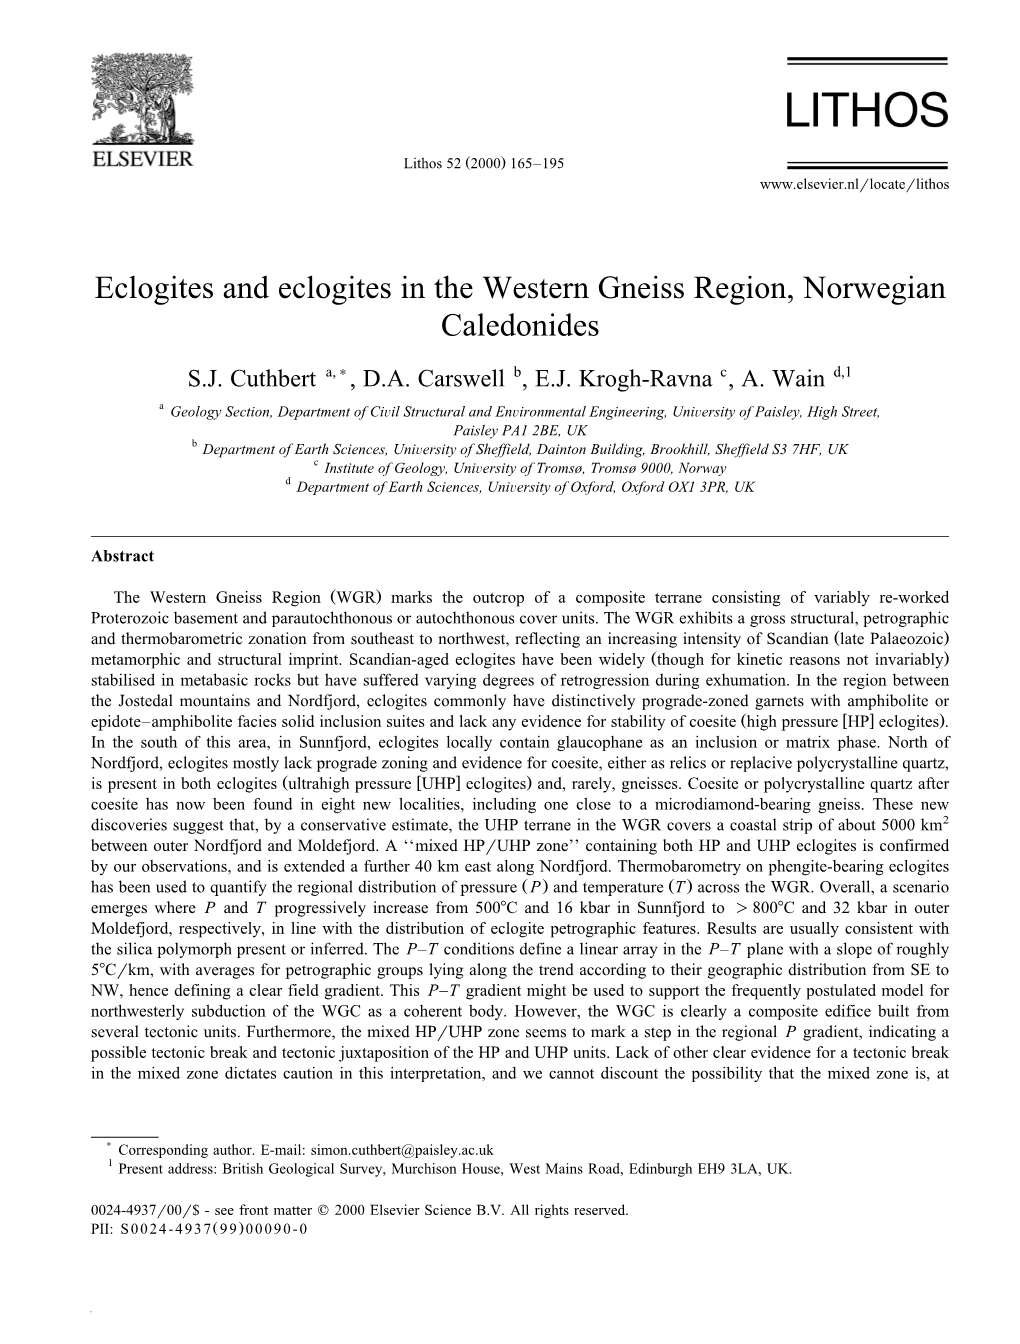 Eclogites and Eclogites in the Western Gneiss Region, Norwegian Caledonides